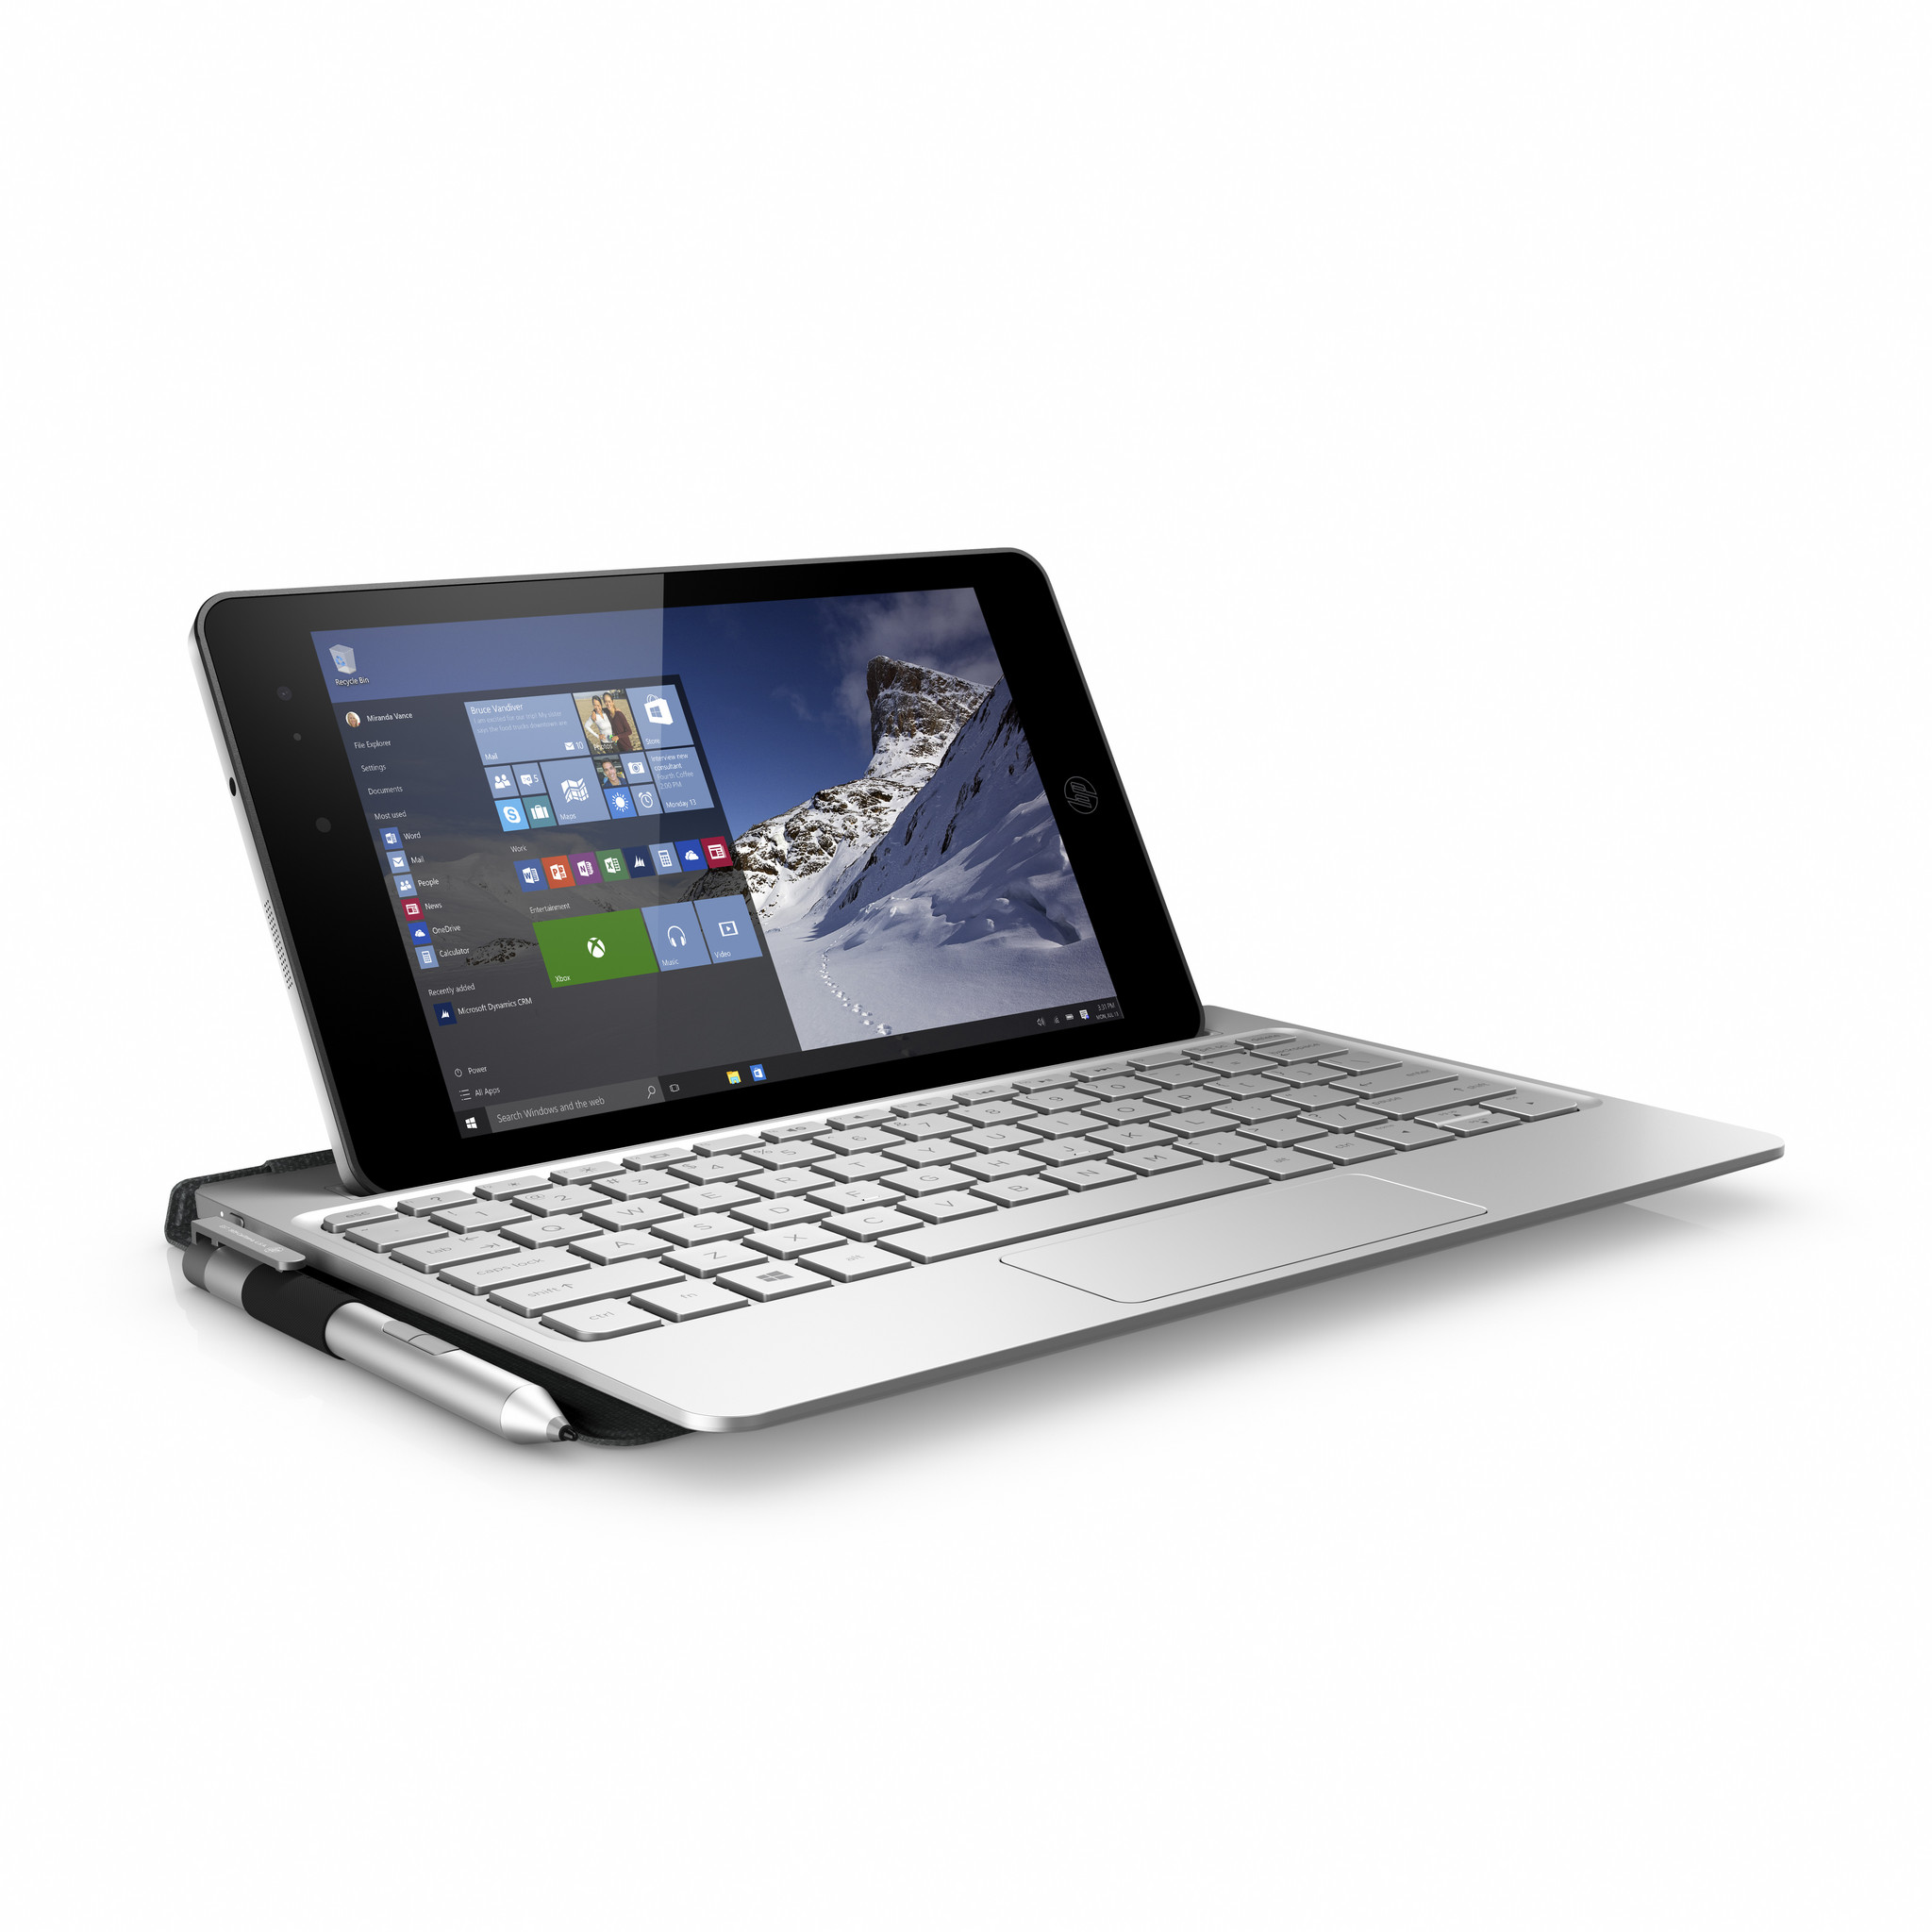 HP ENVY 8 Note_right facing with keyboard and stylus.jpg